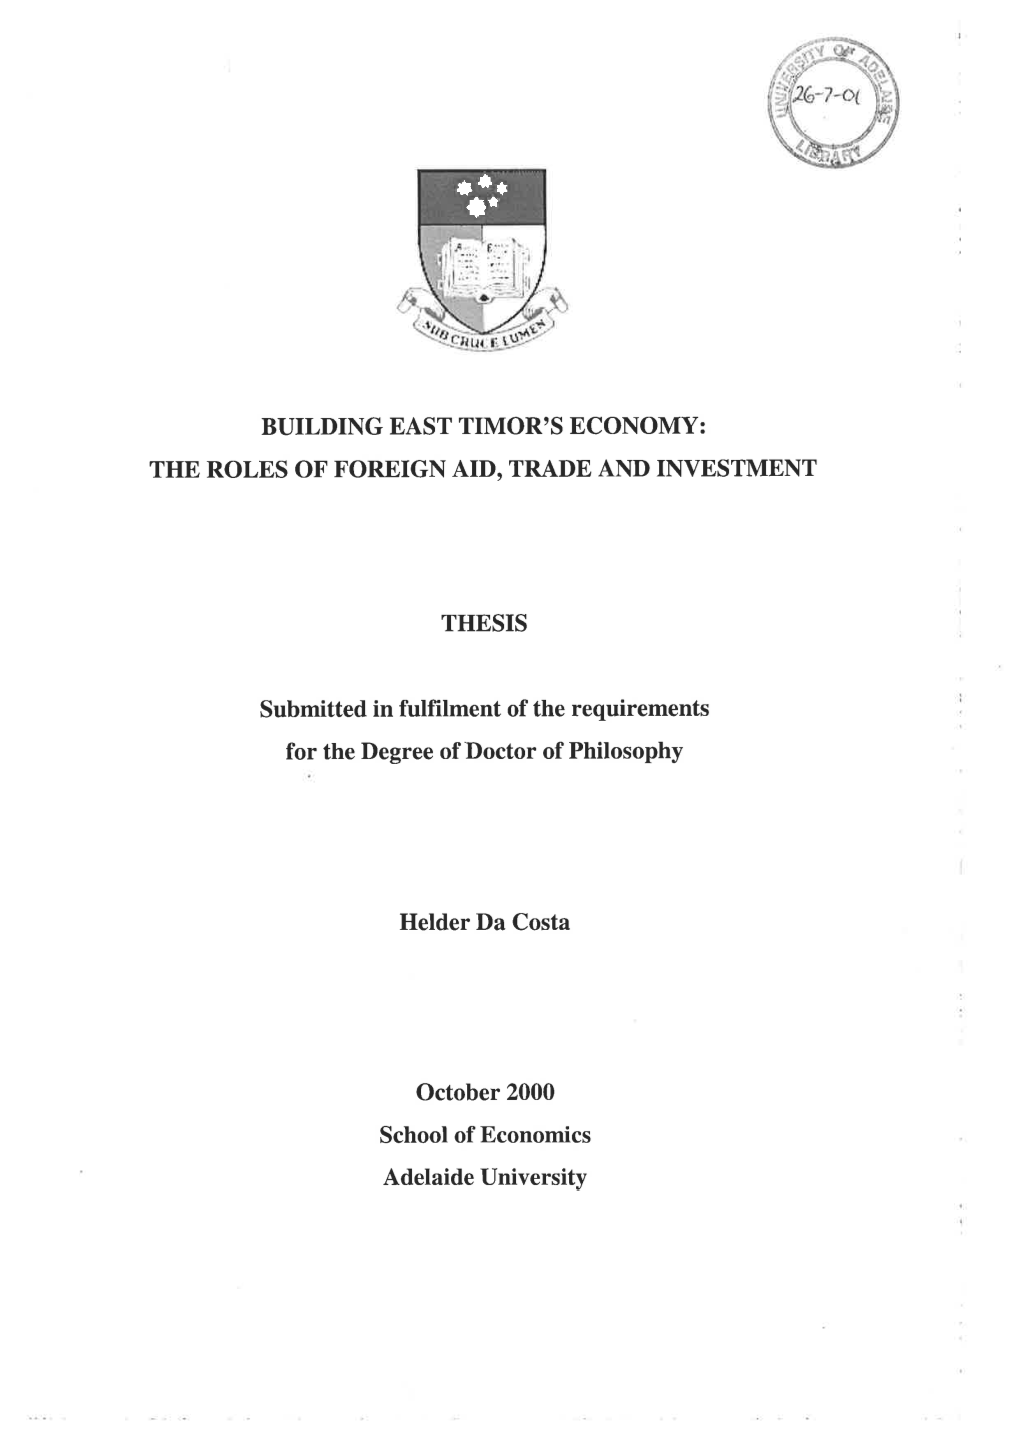 Building East Timor's Economy: the Roles of Foreign Aid, Trade and Investment